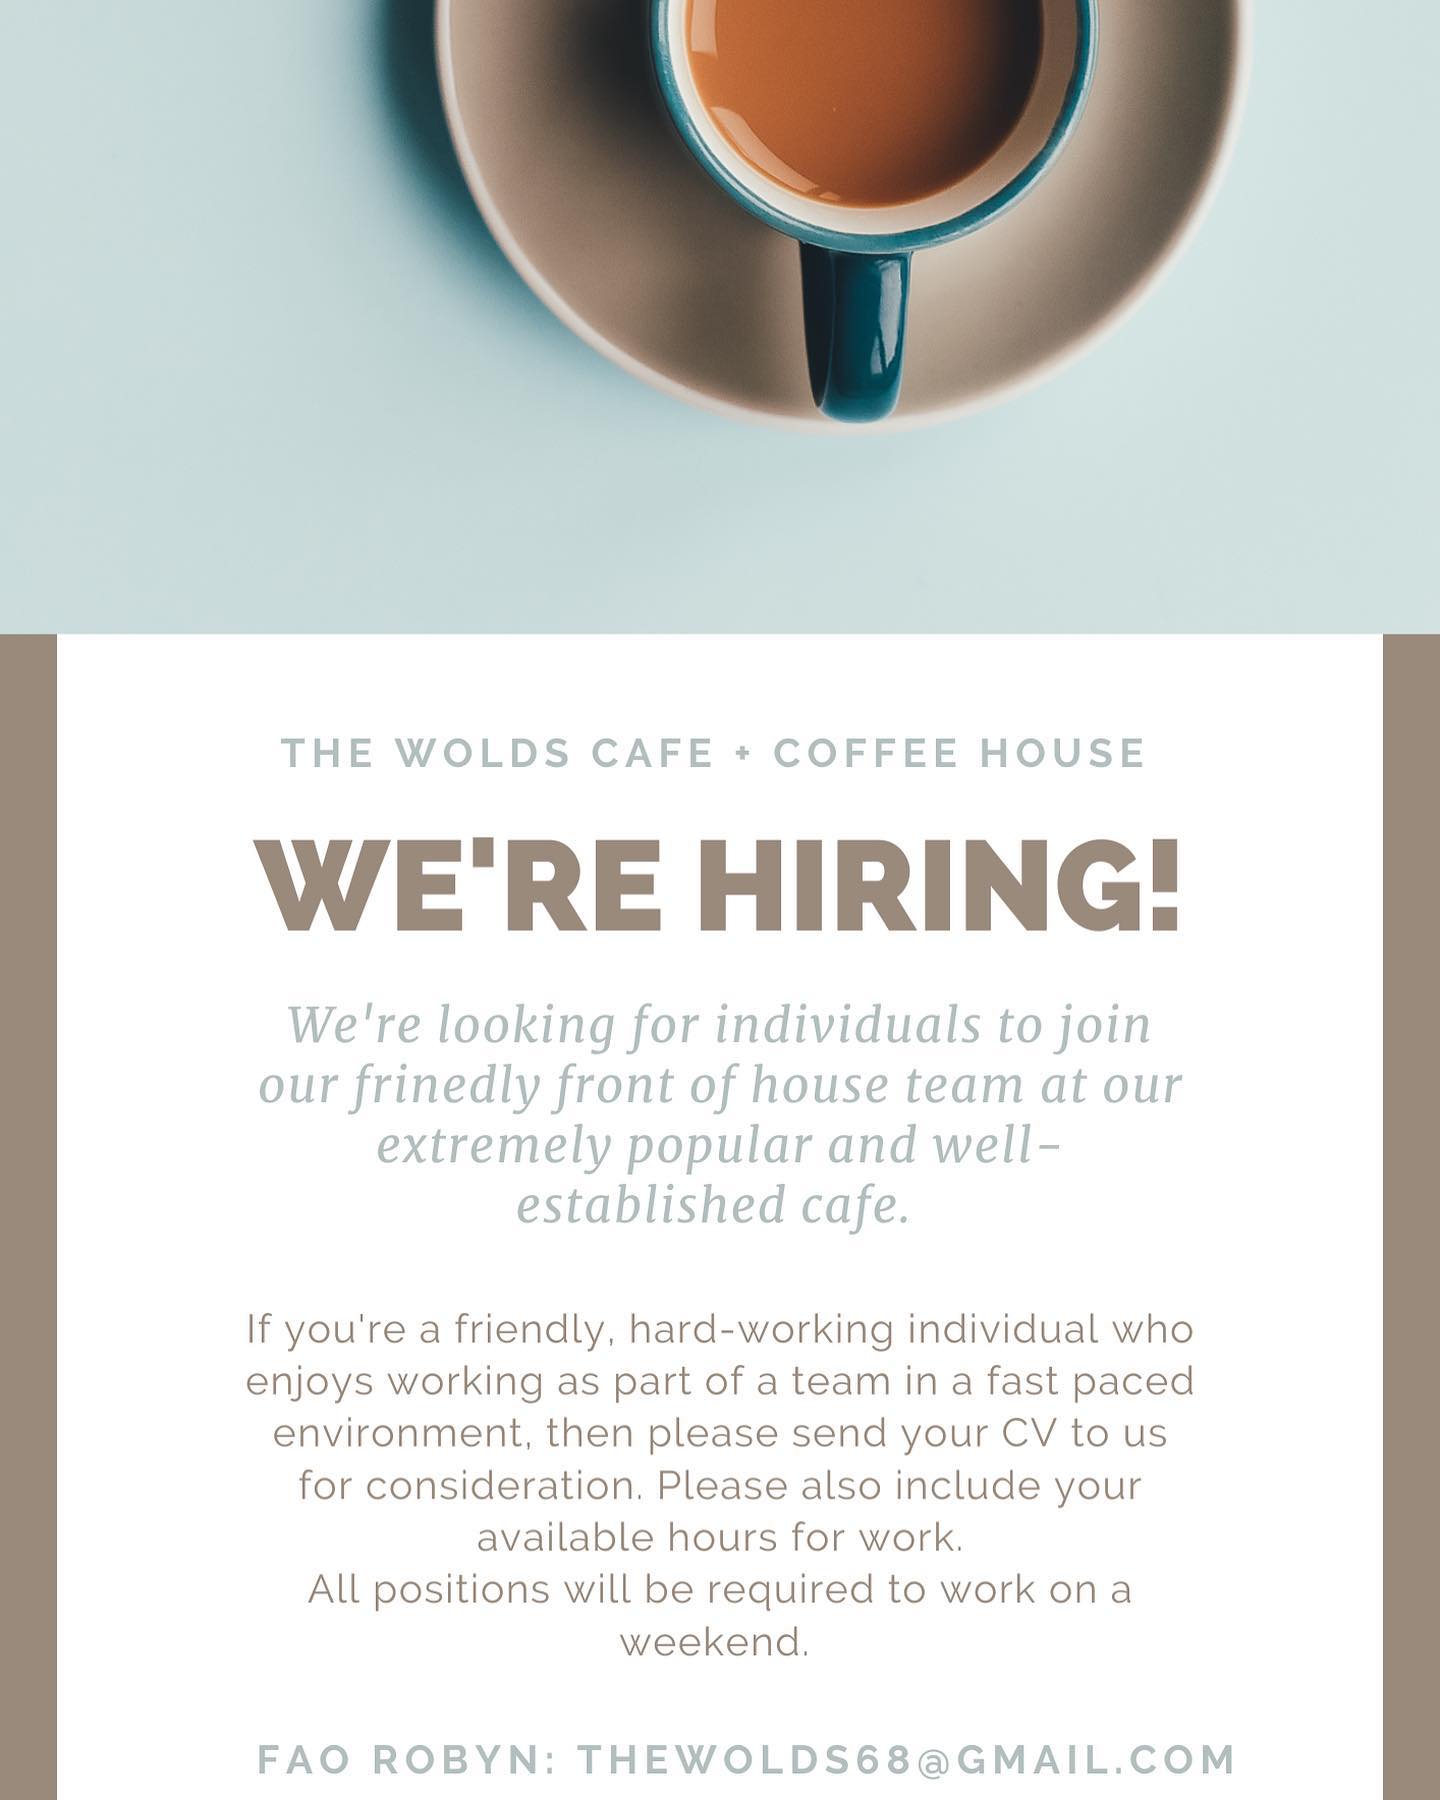 The Wolds Café & Coffee House